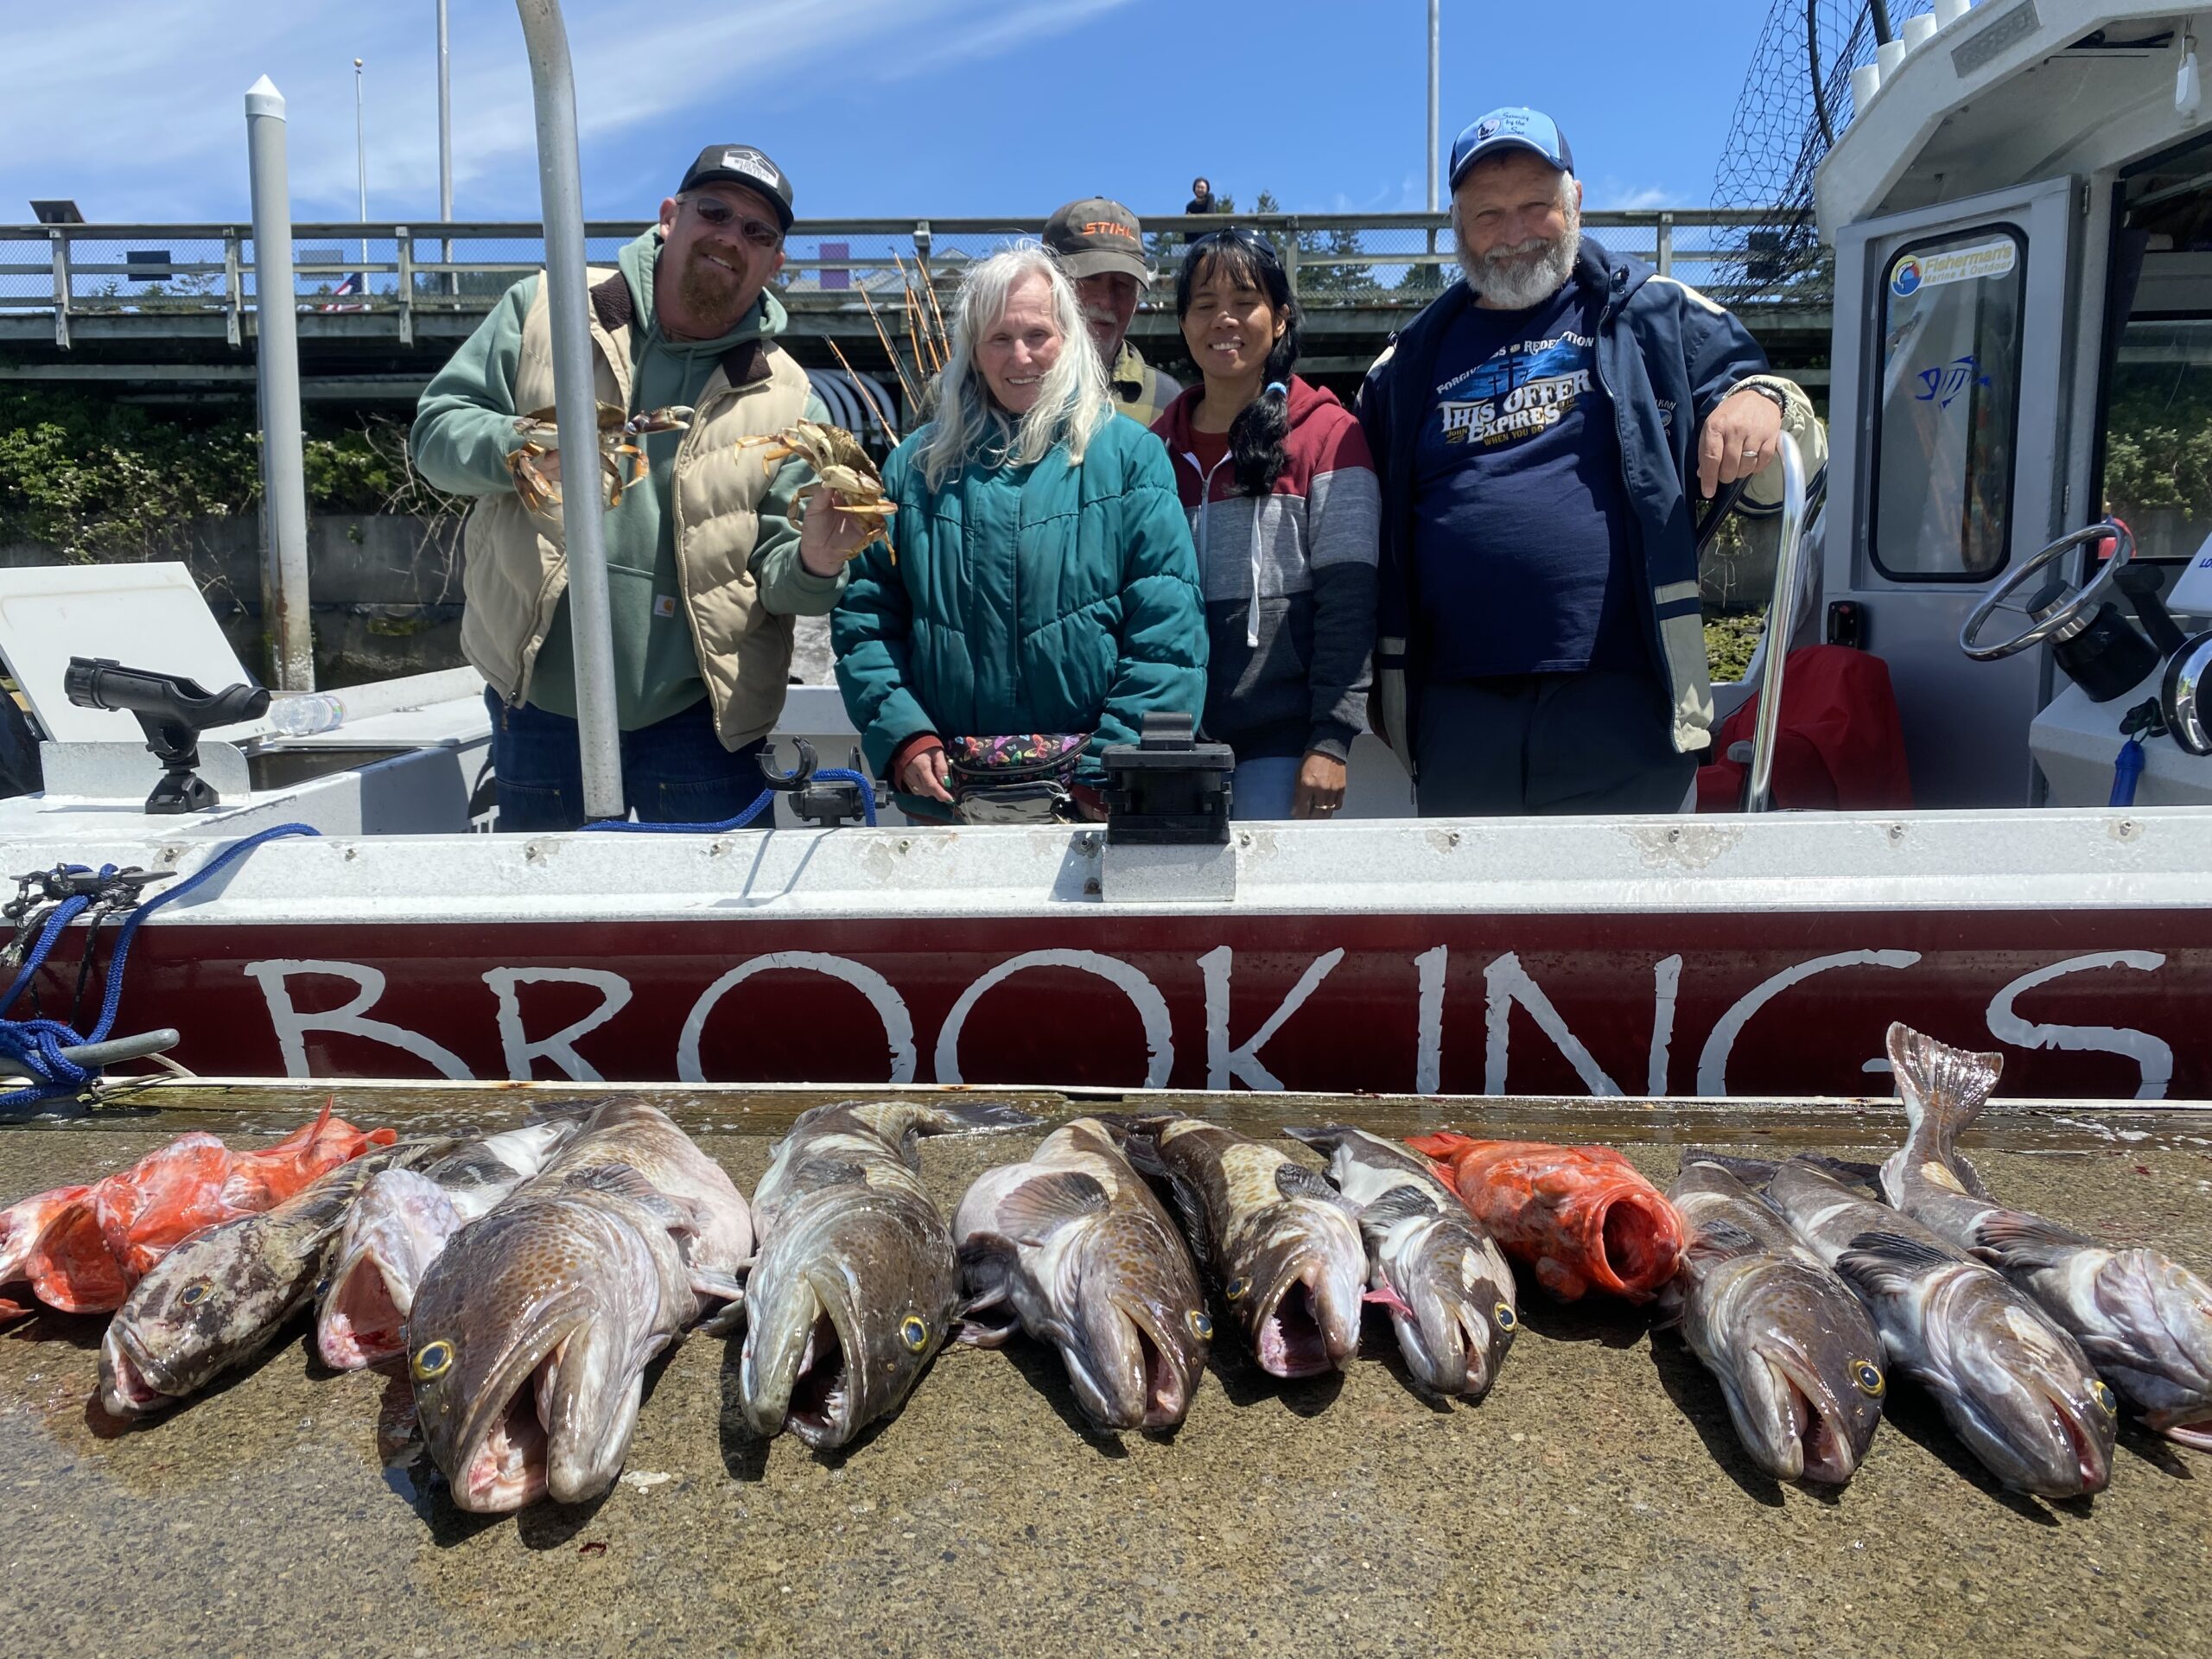 Pacific Angler Friday Fishing Report: July 29, 2022 - Pacific Angler